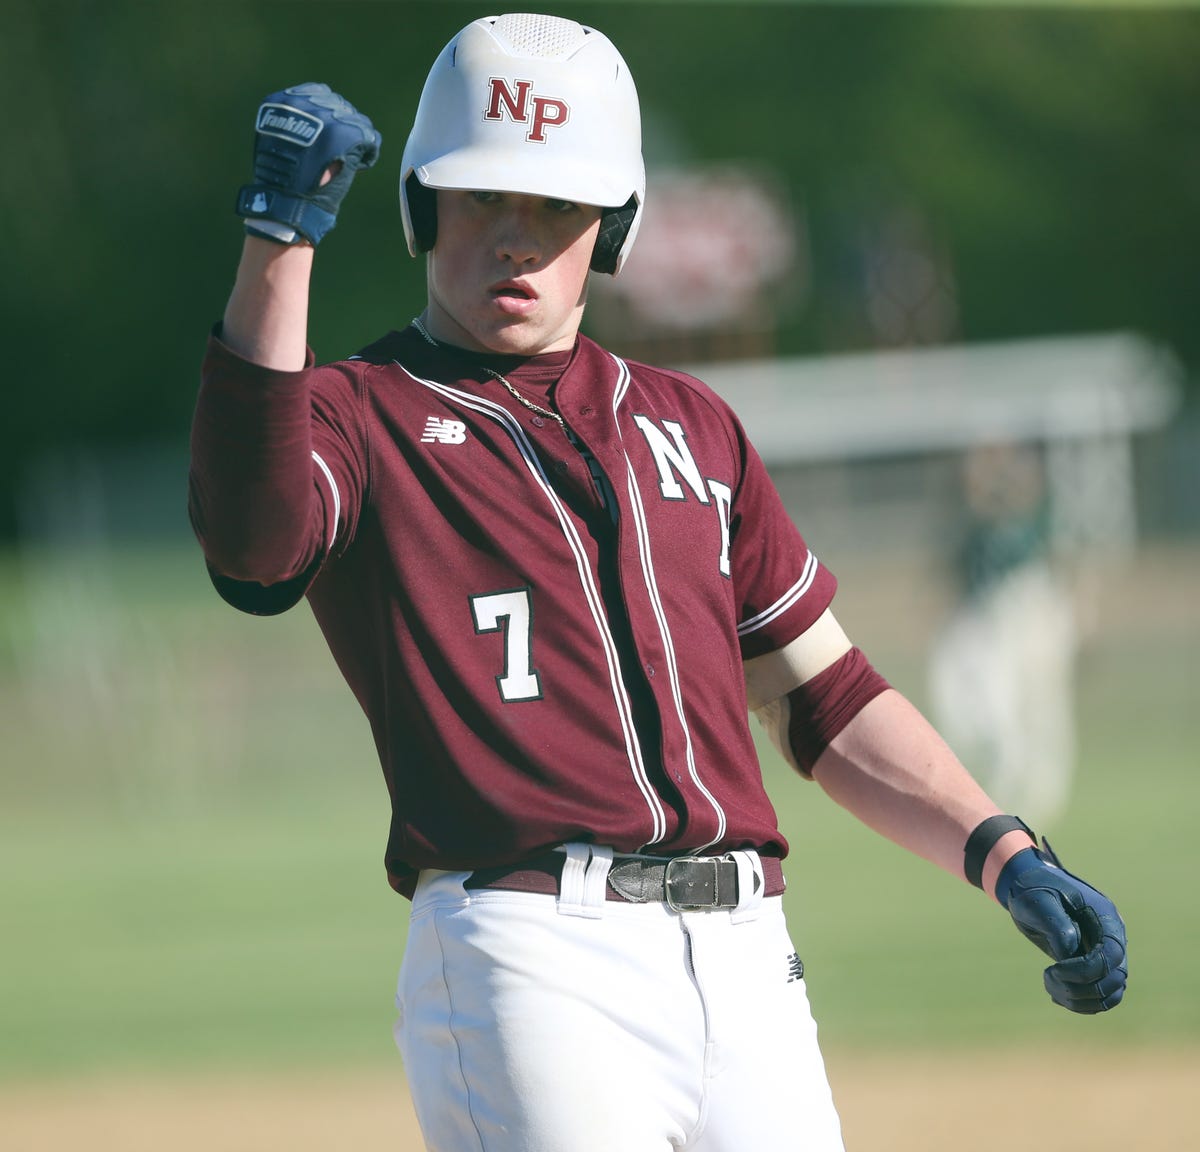 Baseball: Maiale, Dillehay lead New Paltz in steppingstone win over Spackenkill